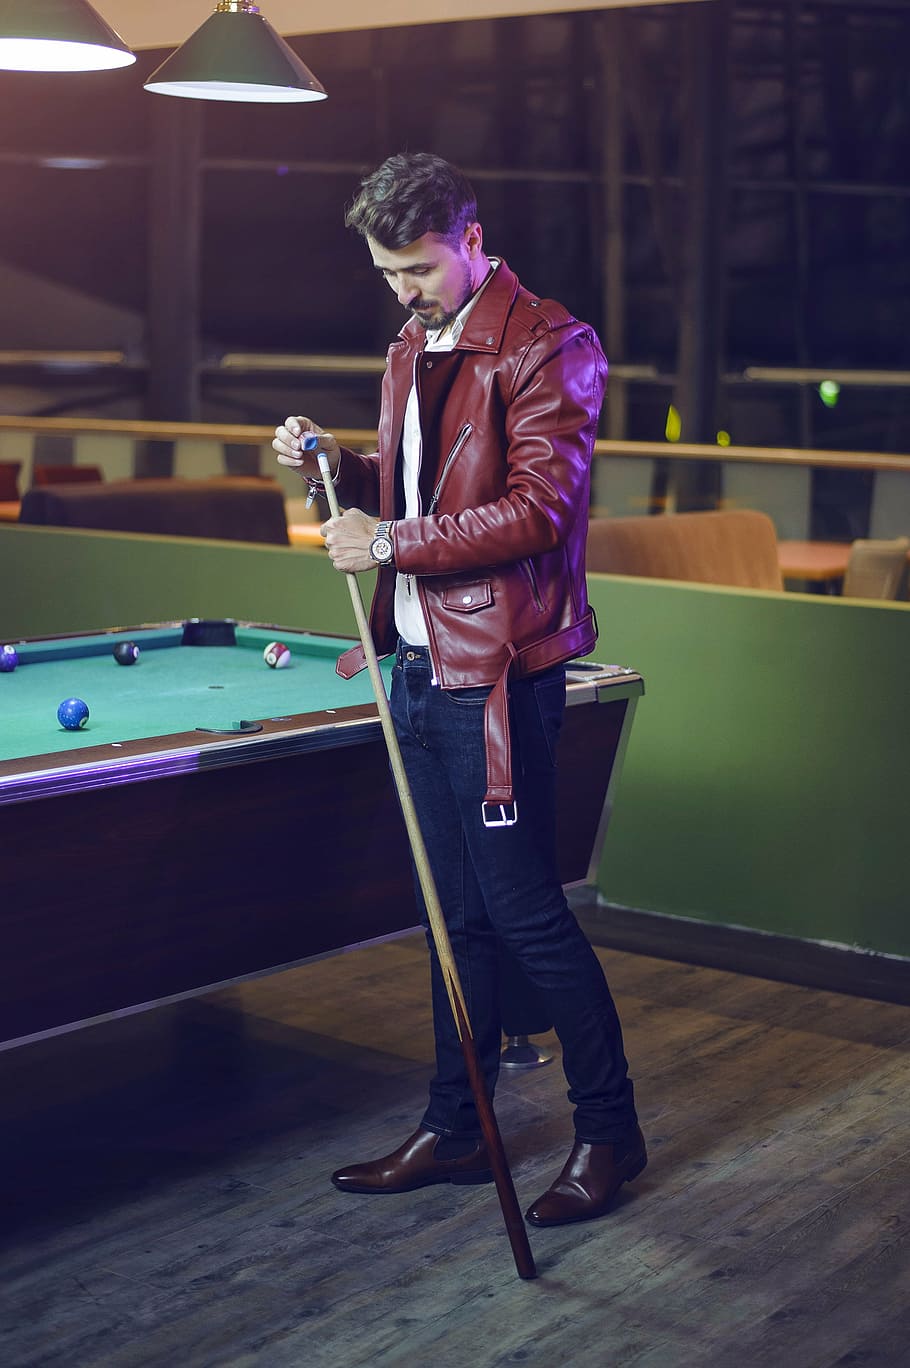 man, holding, cue, stick, standing, table pool, guy playing billiard, pool table, men, arcade games